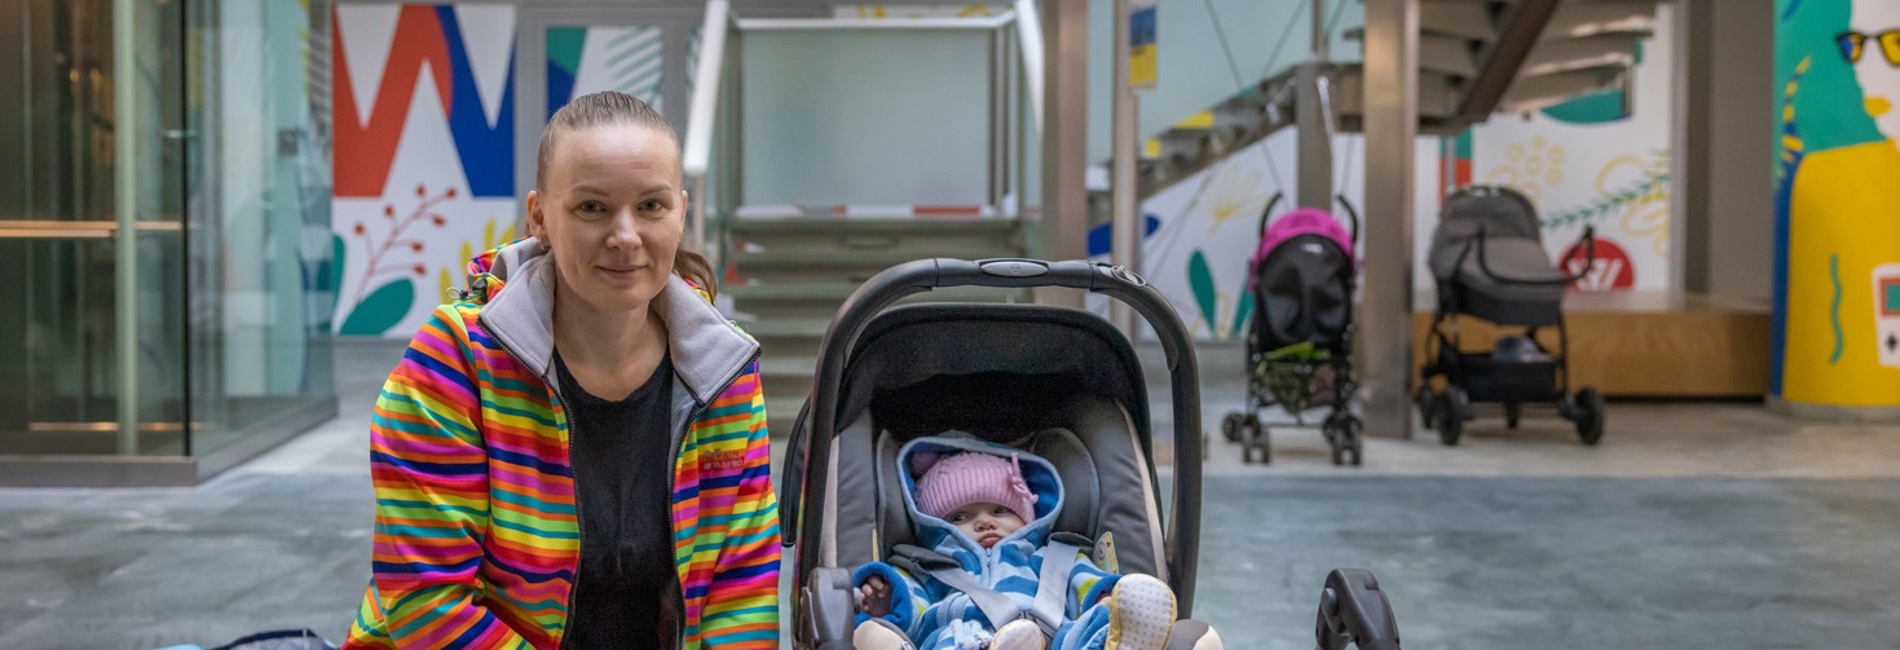 Ukrainian refugee Hanna, 38, and her baby at an aid distribution point run by UNHCR partner Mother's House Foundation in Warsaw, Poland.